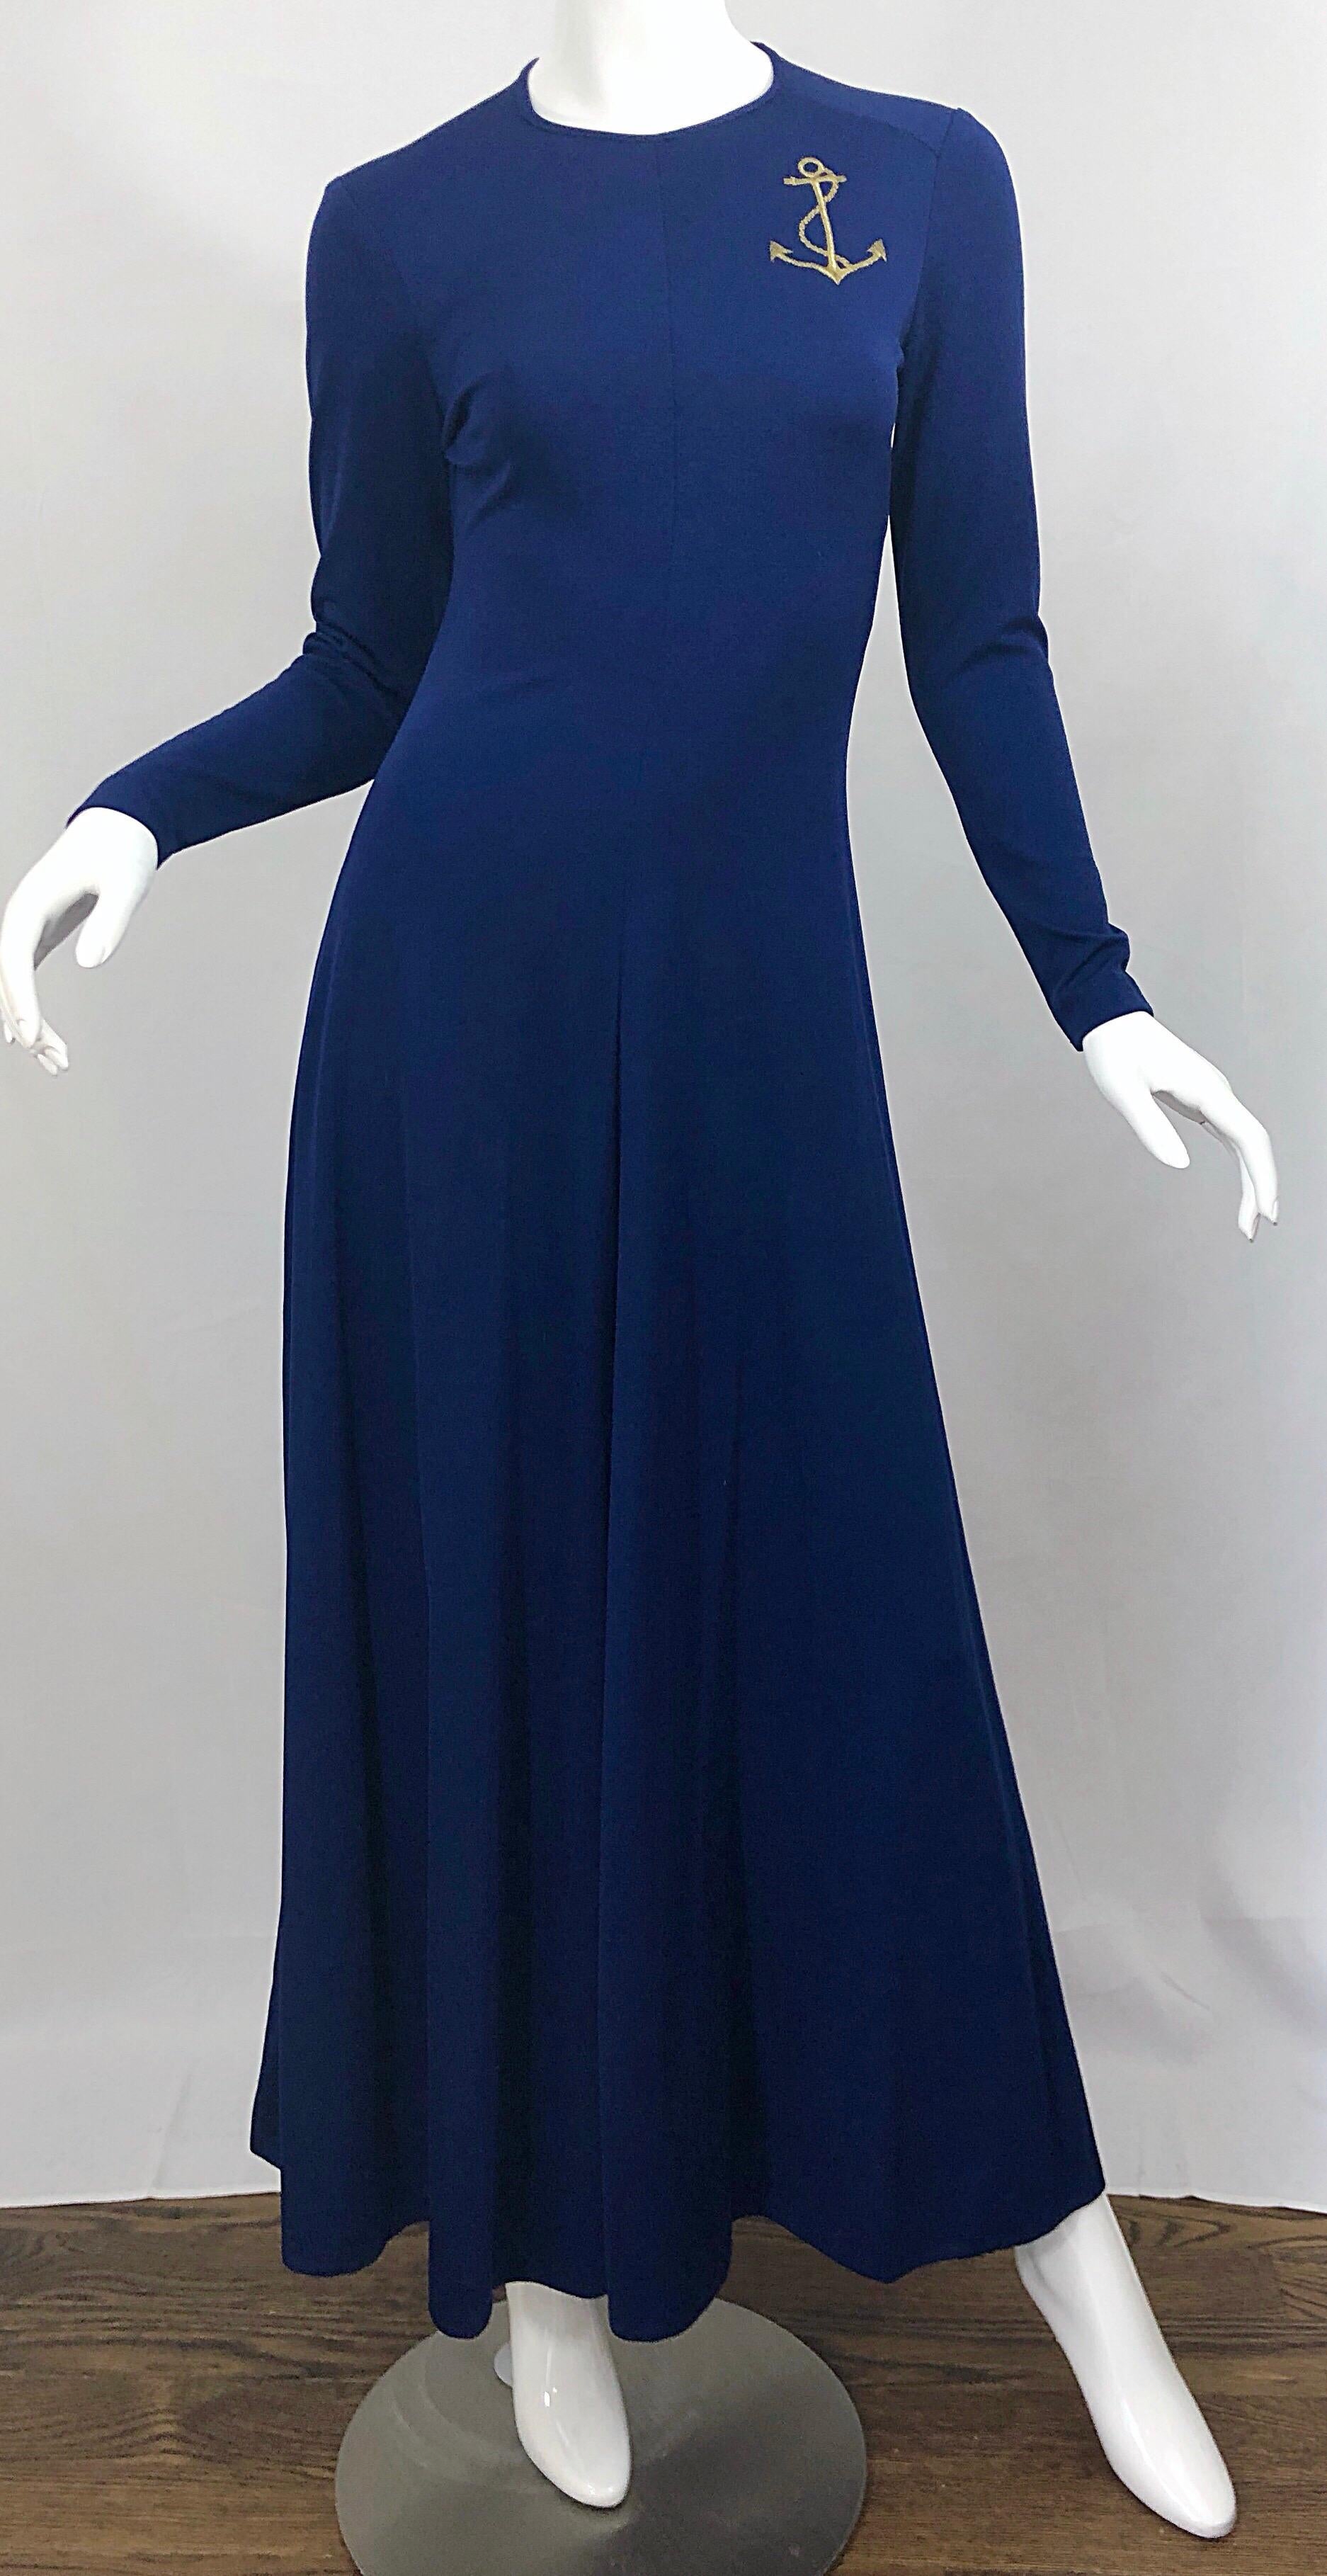 Women's Amazing 1970s Nautical Navy Blue + Gold Anchor Patch Vintage Jersey maxi Dress For Sale